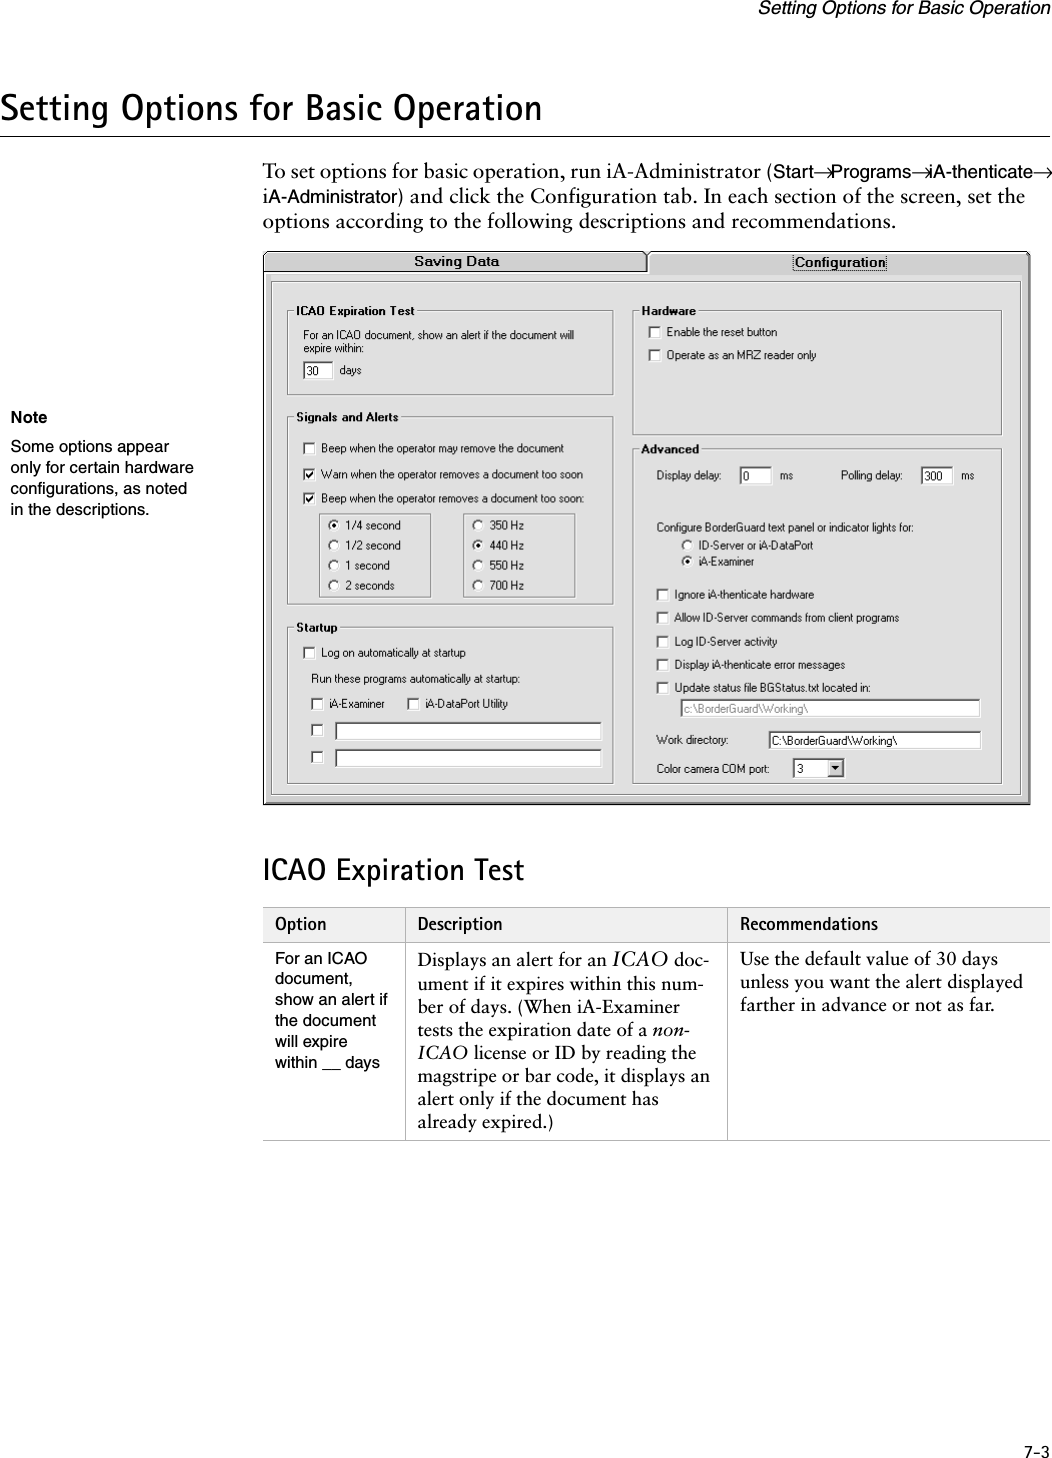 7-3Setting Options for Basic OperationSetting Options for Basic OperationTo set options for basic operation, run iA-Administrator (Start→ Programs→ iA-thenticate→ iA-Administrator) and click the Configuration tab. In each section of the screen, set the options according to the following descriptions and recommendations.ICAO Expiration TestOption Description RecommendationsFor an ICAO document, show an alert if the document will expire within __ daysDisplays an alert for an ICAO doc-ument if it expires within this num-ber of days. (When iA-Examiner tests the expiration date of a non-ICAO license or ID by reading the magstripe or bar code, it displays an alert only if the document has already expired.)Use the default value of 30 days unless you want the alert displayed farther in advance or not as far.NoteSome options appear only for certain hardware configurations, as noted in the descriptions.